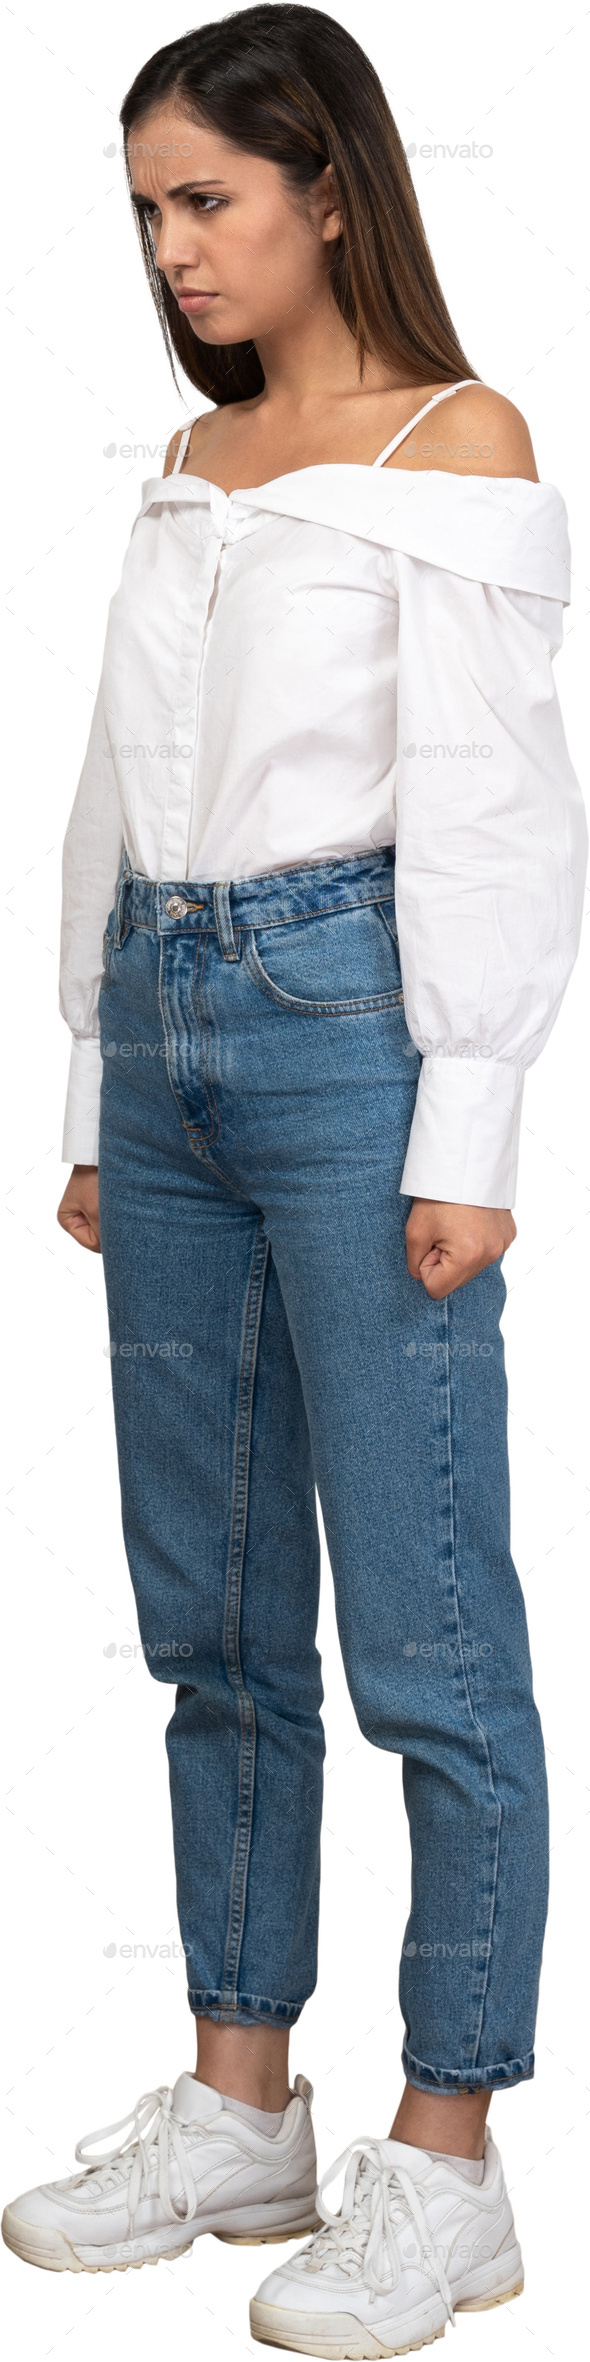 a woman wearing jeans and a white off the shoulder shirt